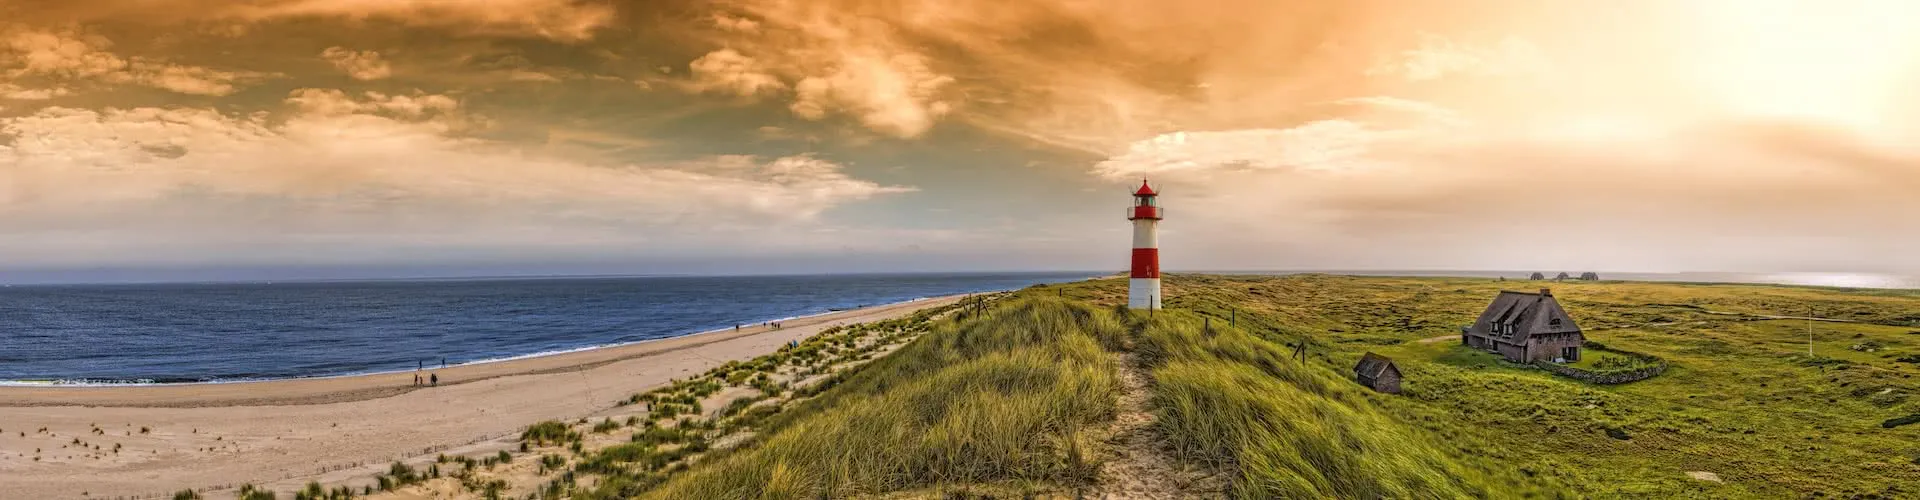 Sylt - the destination for company trips